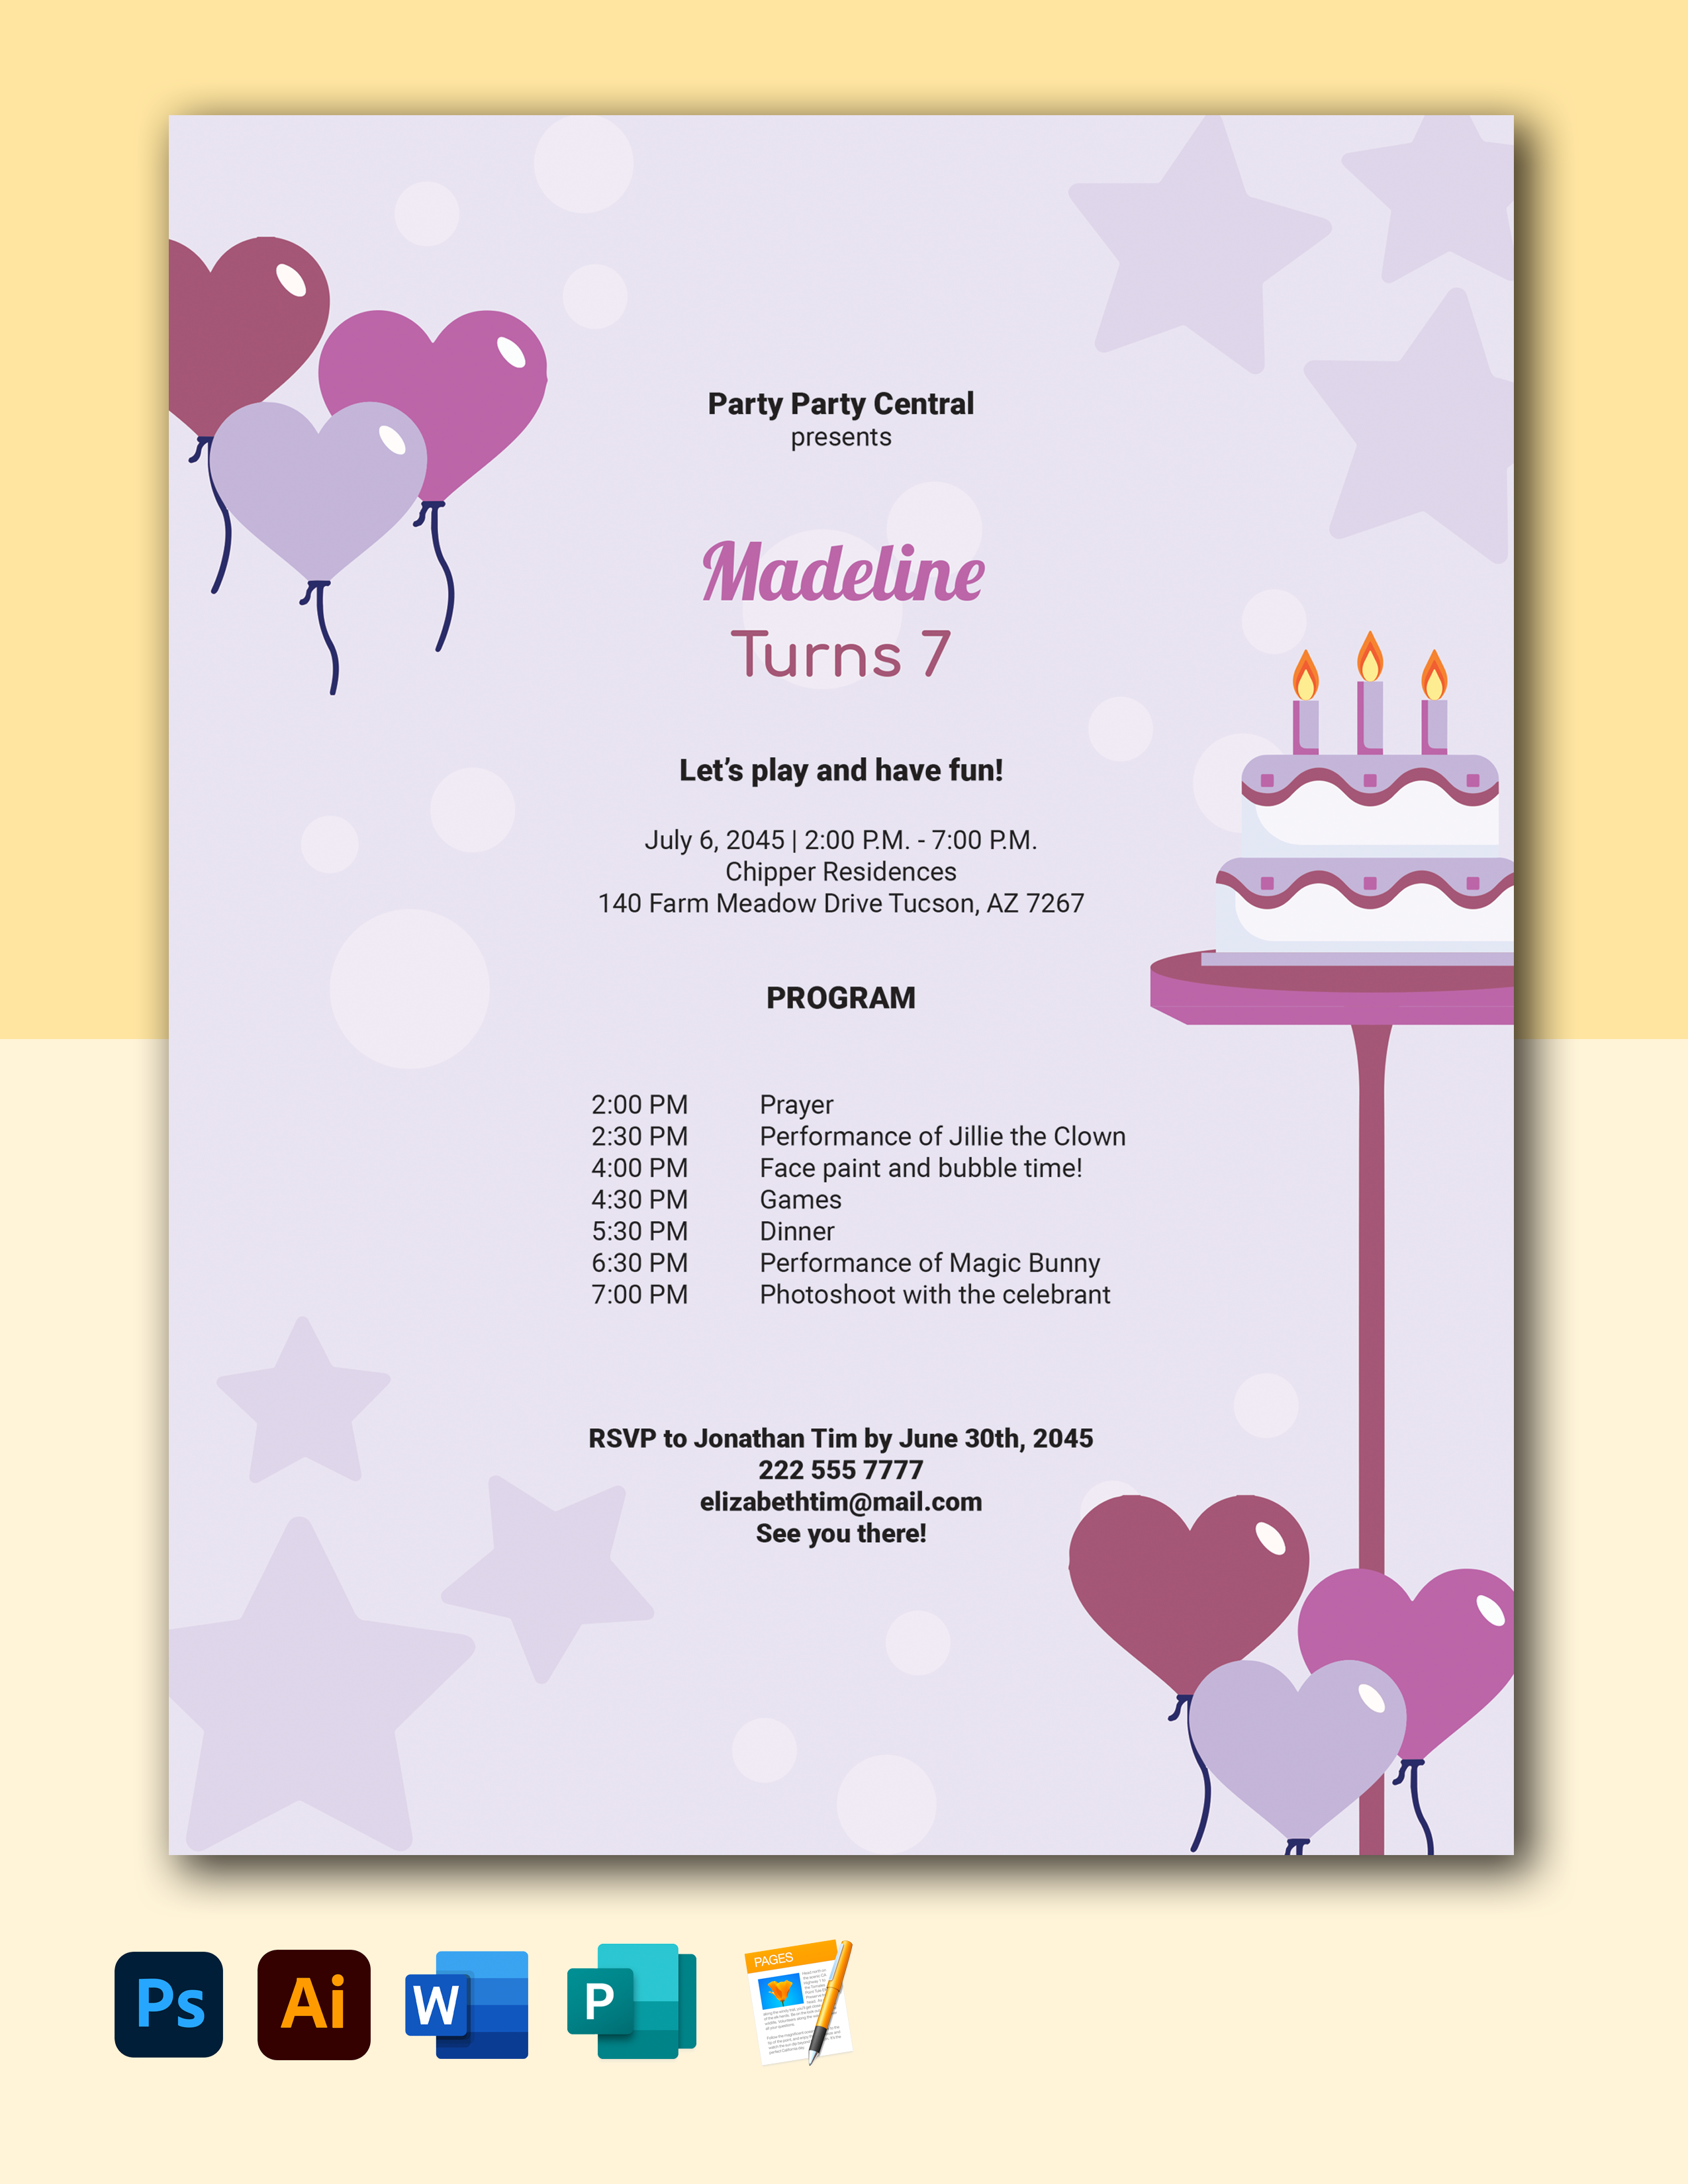 FREE Birthday Invitation Template - Download in Word, Google Docs, PDF,  Illustrator, Photoshop, Apple Pages, Publisher, InDesign, Outlook, EPS,  SVG, JPG, PNG, Wordpress